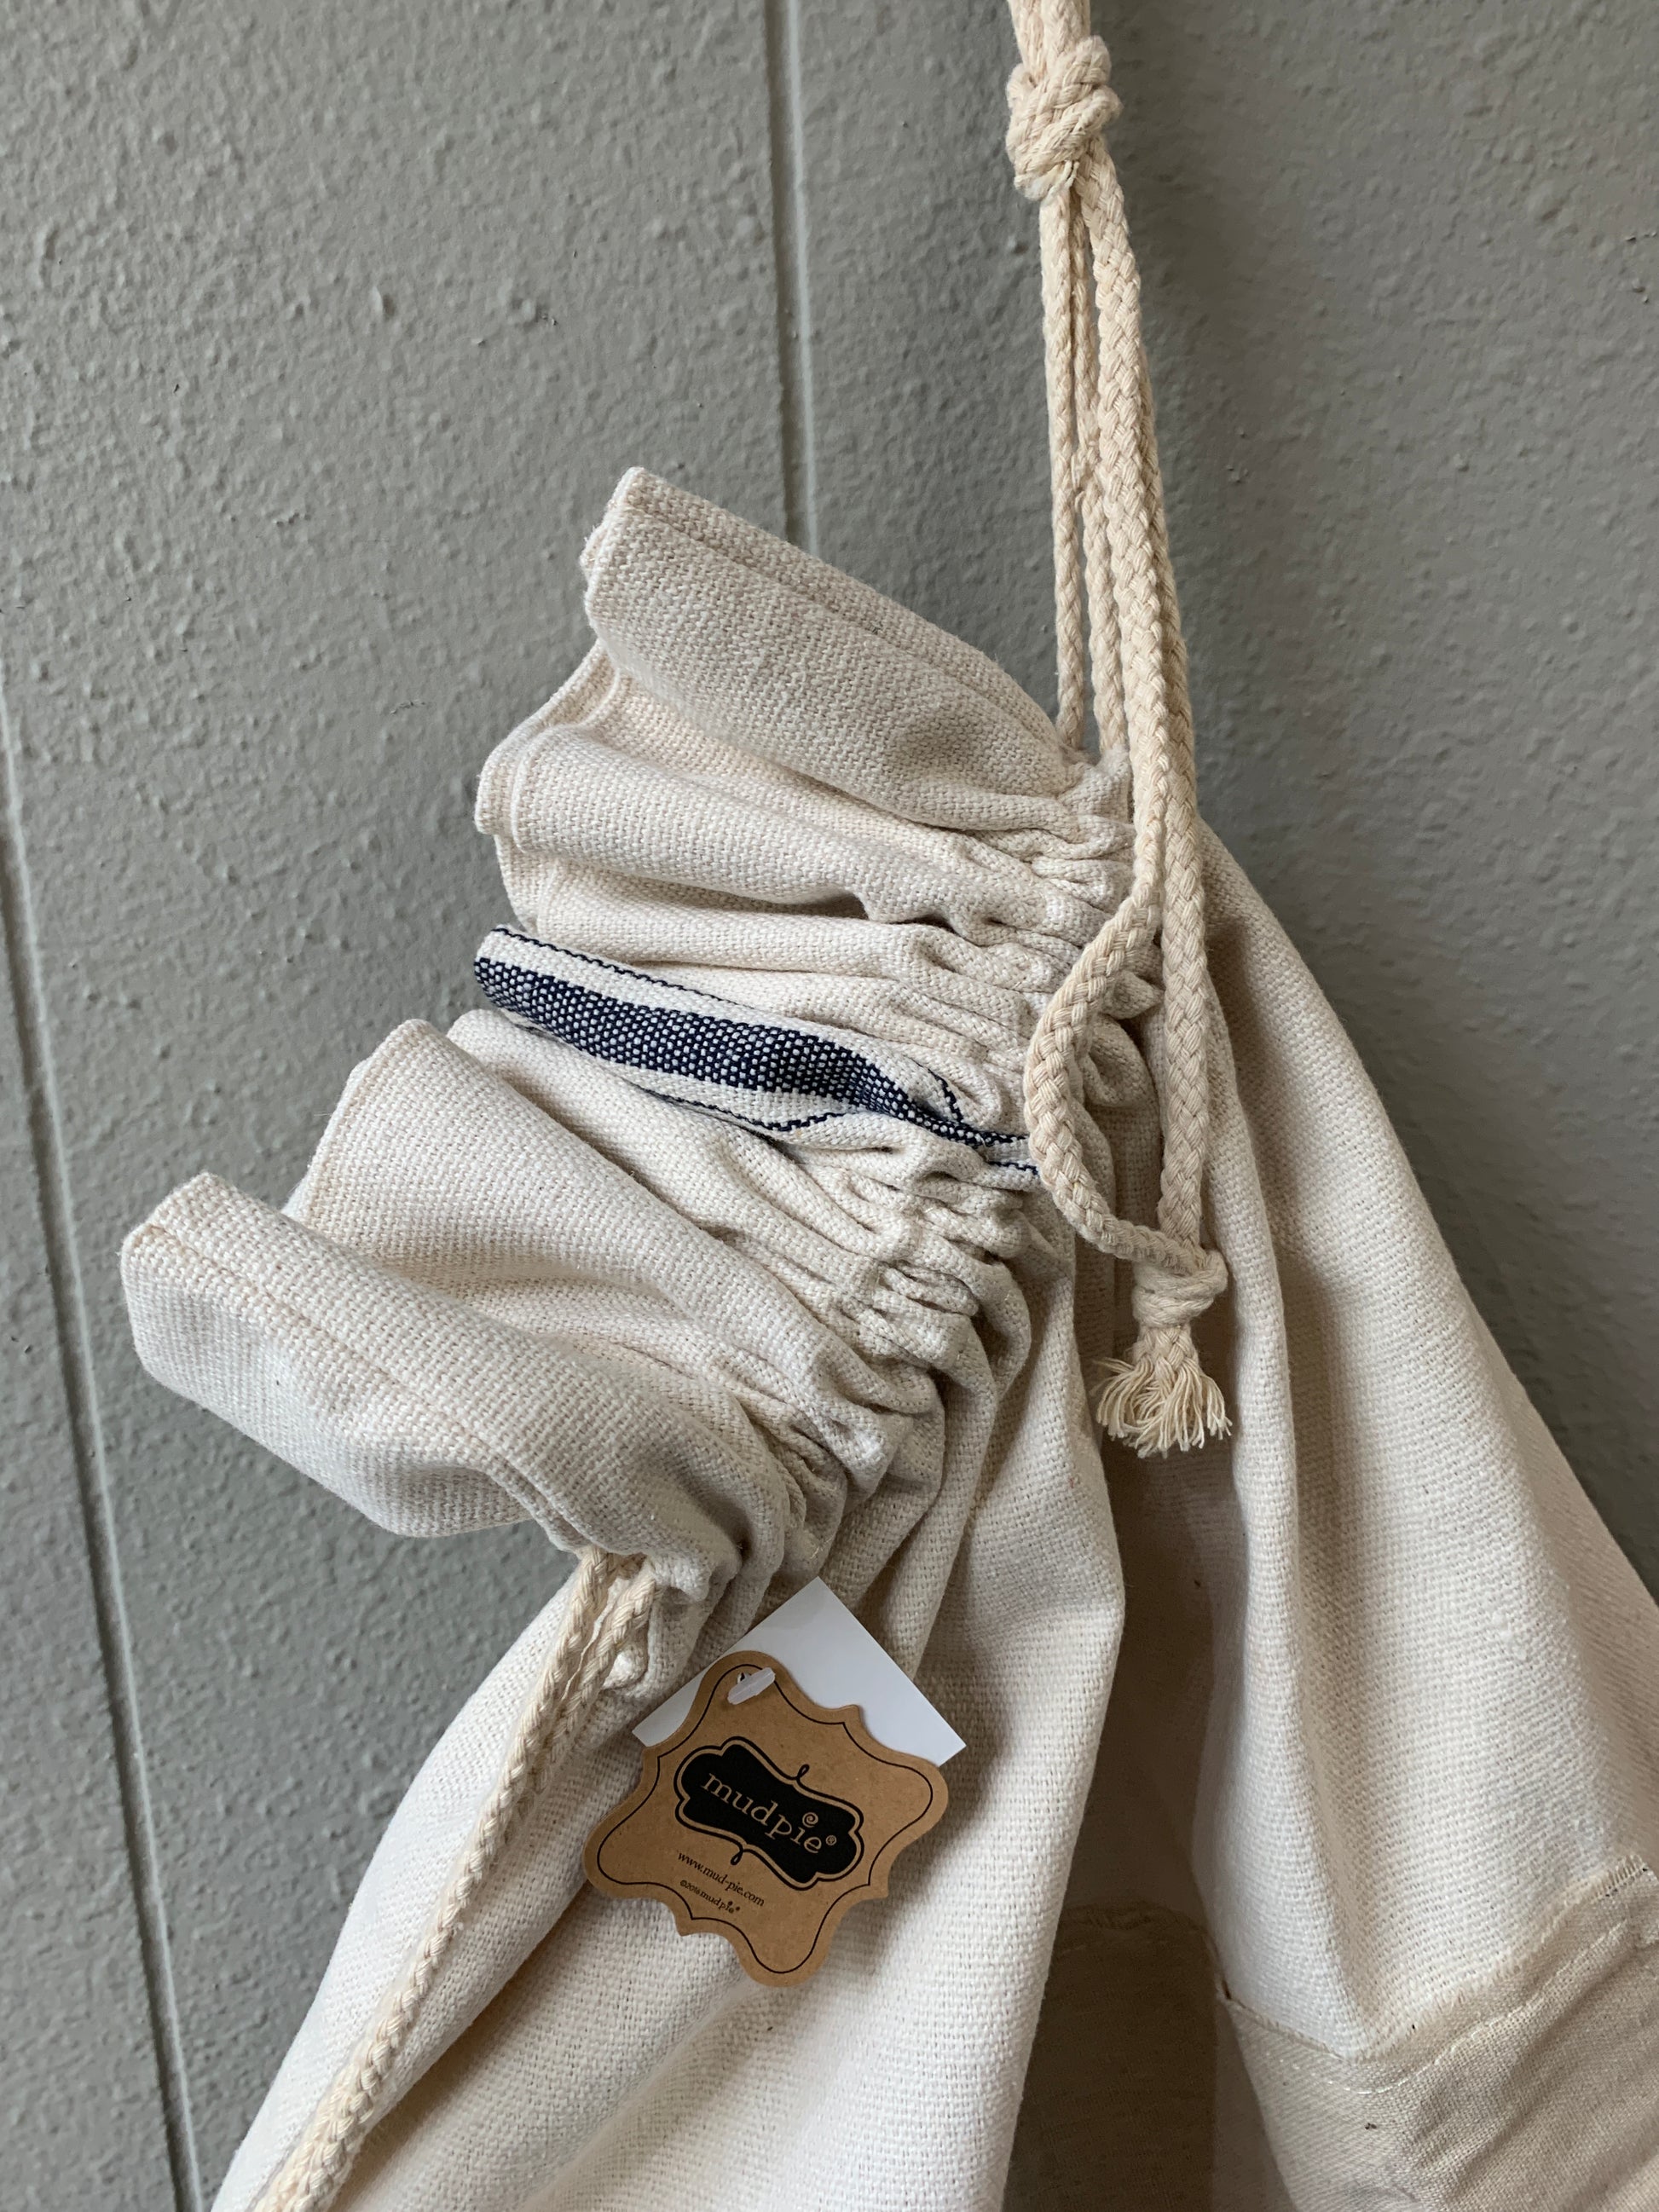 Grainsack laundry bag features applied front canvas patch with frayed edges and "Dry Cleaning" printed sentiments and canvas rope drawstring.  Size: 30" x 22"